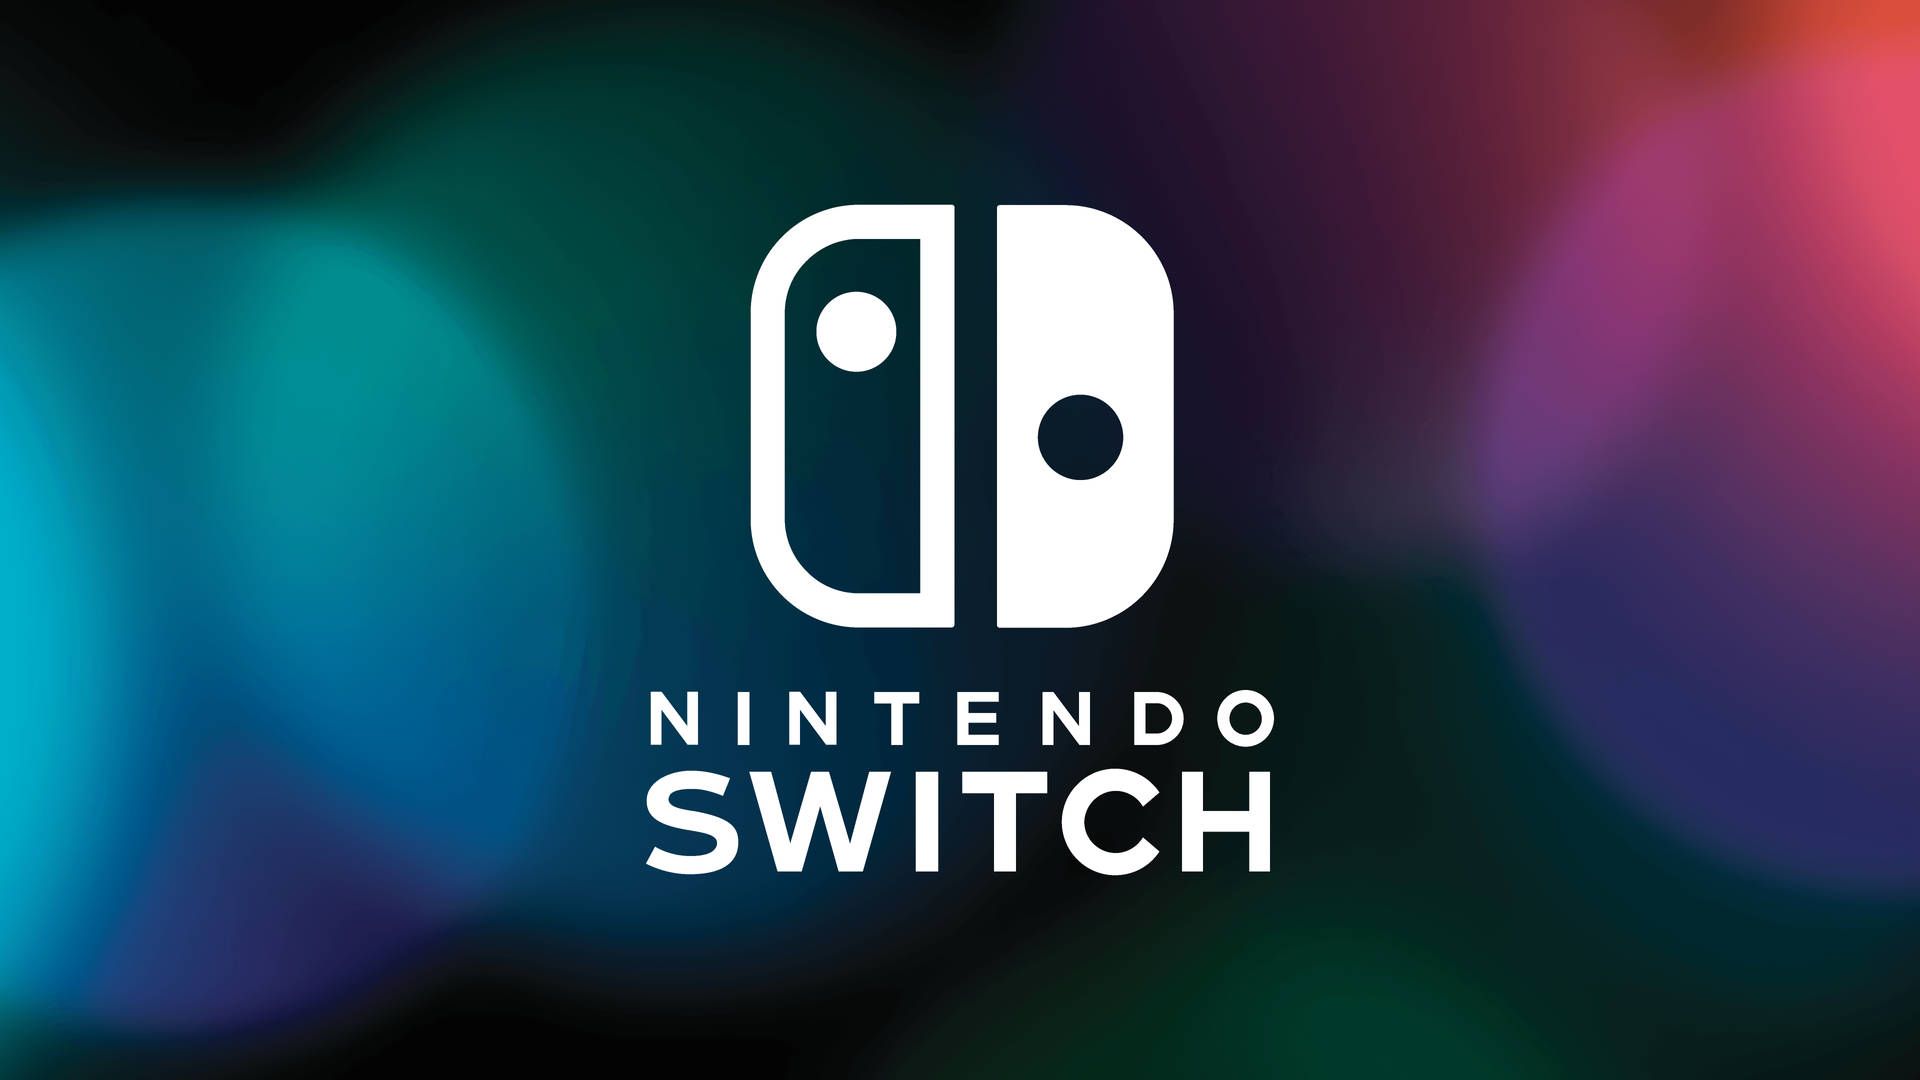 Nintendo Switch wallpaper with the logo on a colorful background - Nintendo